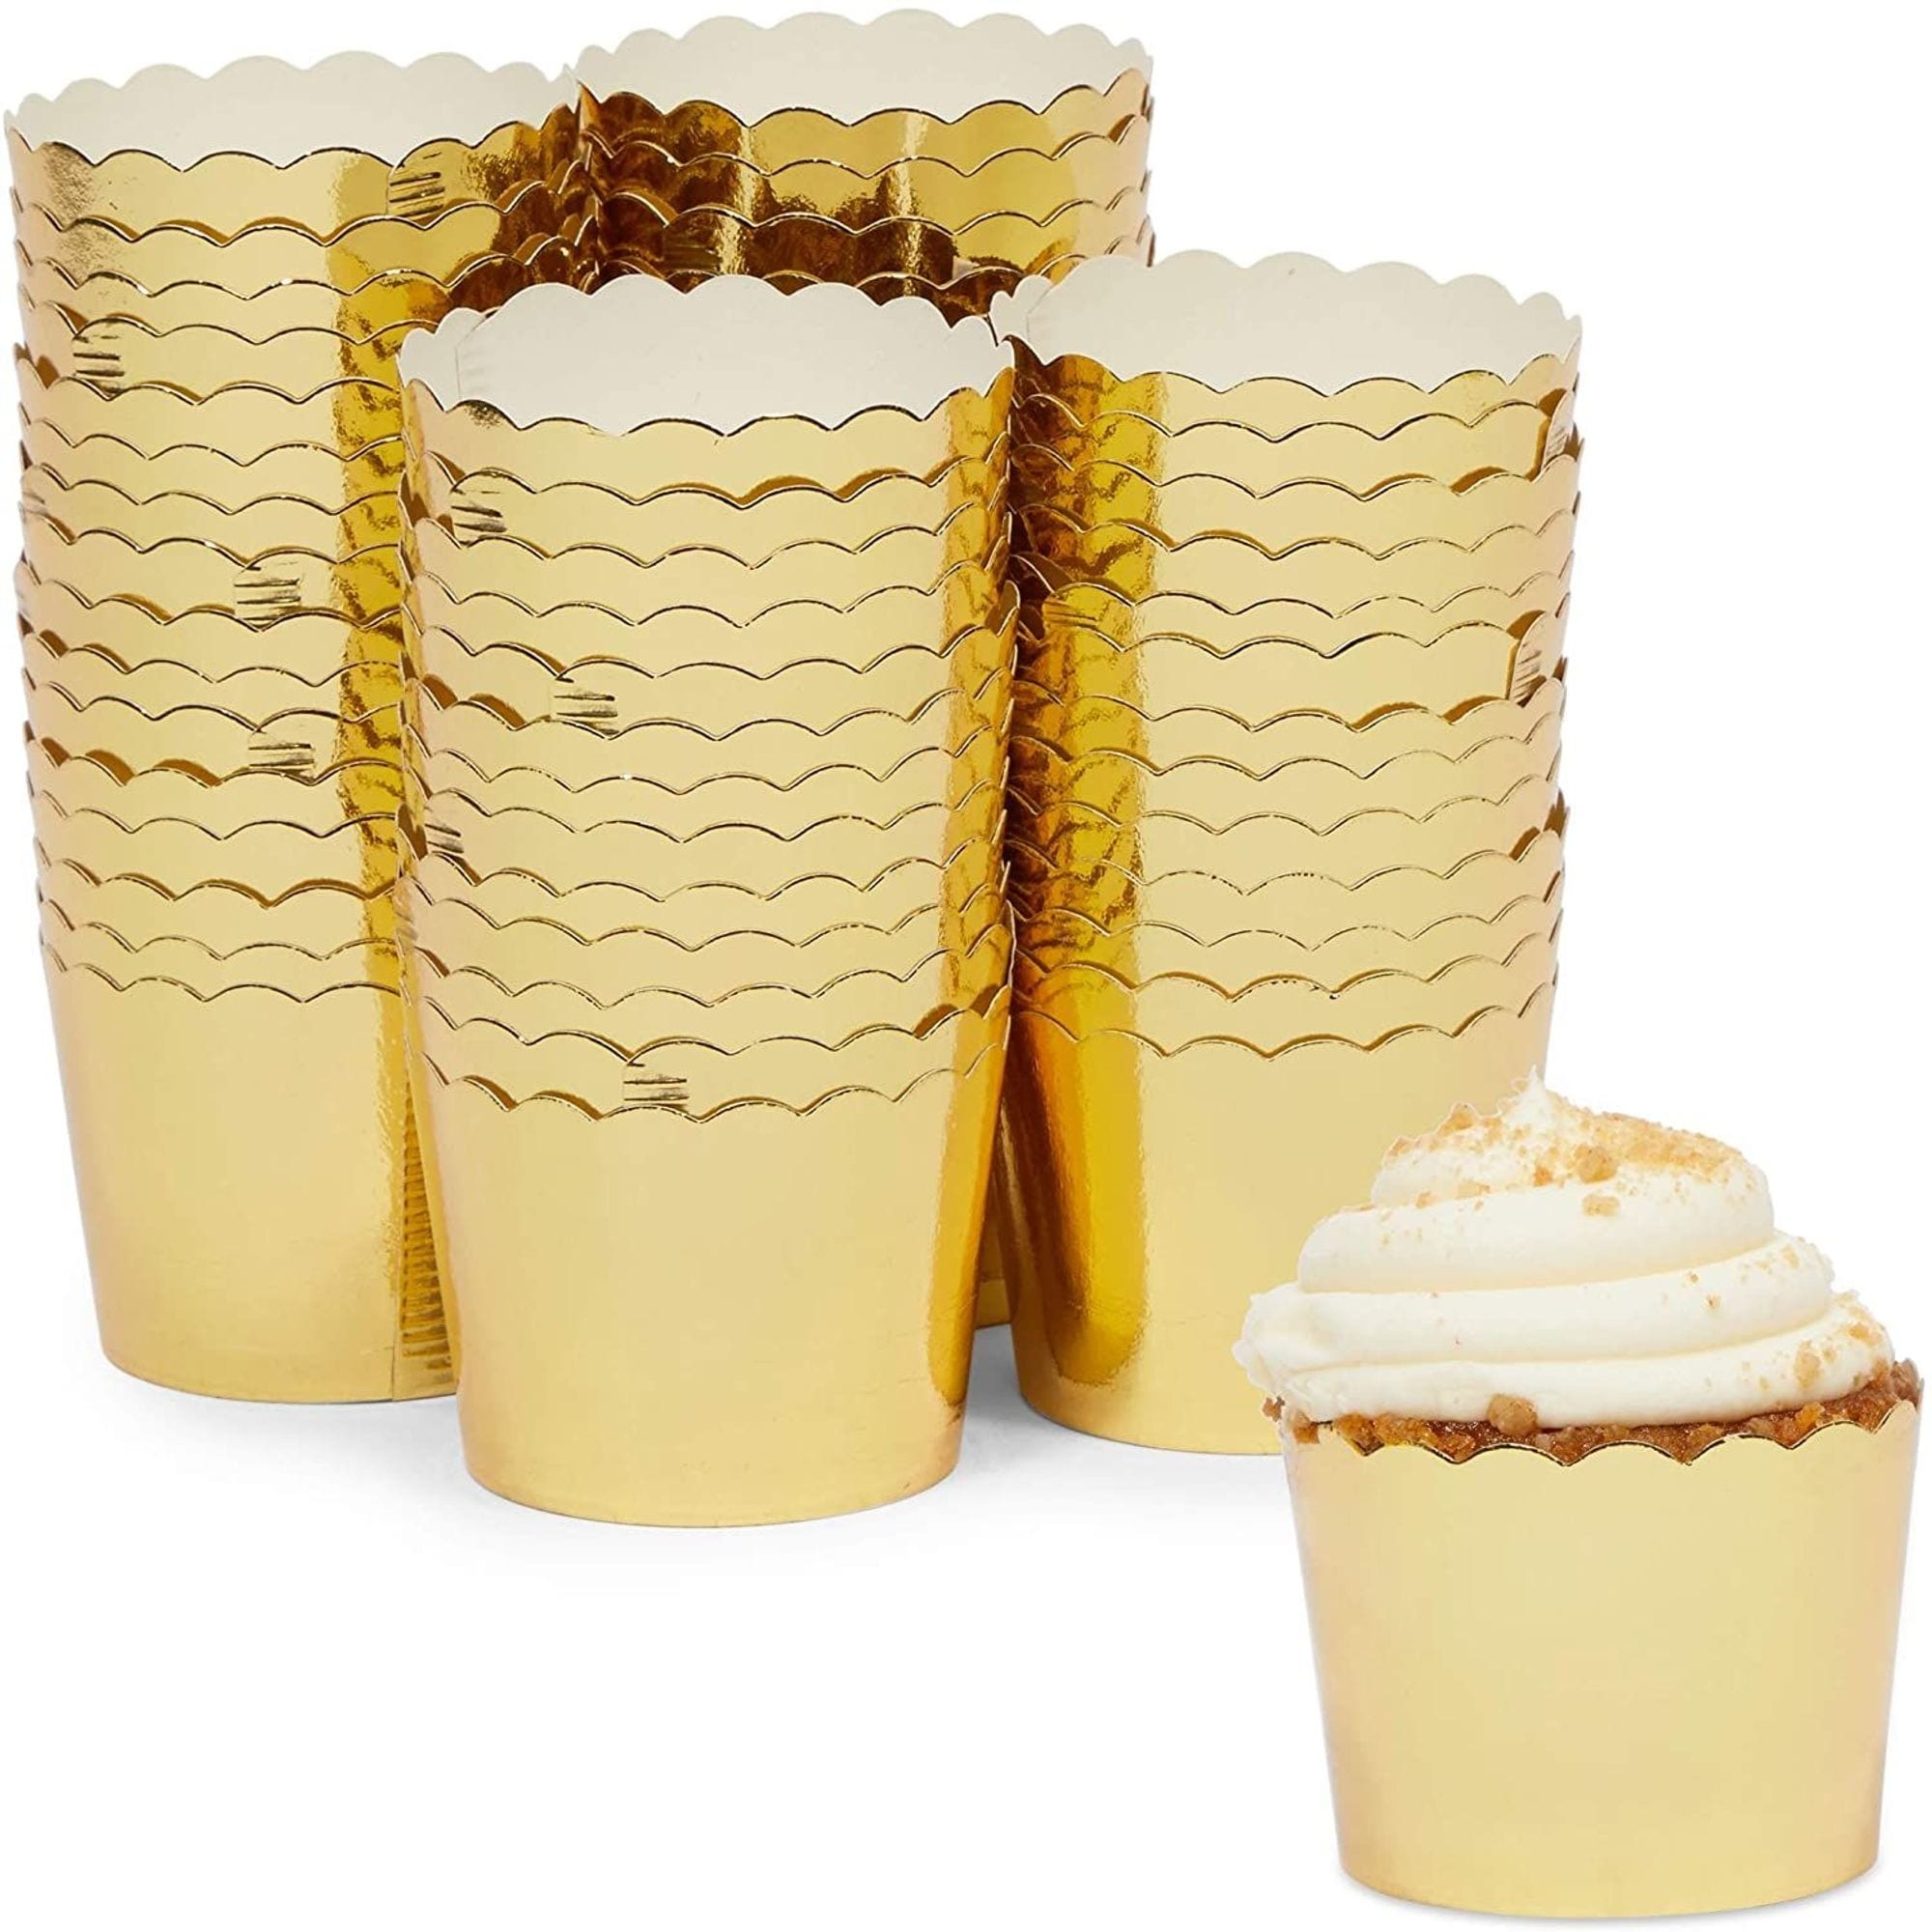 https://ak1.ostkcdn.com/images/products/is/images/direct/8ae2f27f4d18b84059a27c671fd44a5d3a4cea21/Gold-Cupcake-Liners%2C-Paper-Muffin-Cups-%281.96-x-1.8-In%2C-60-Pack%29.jpg